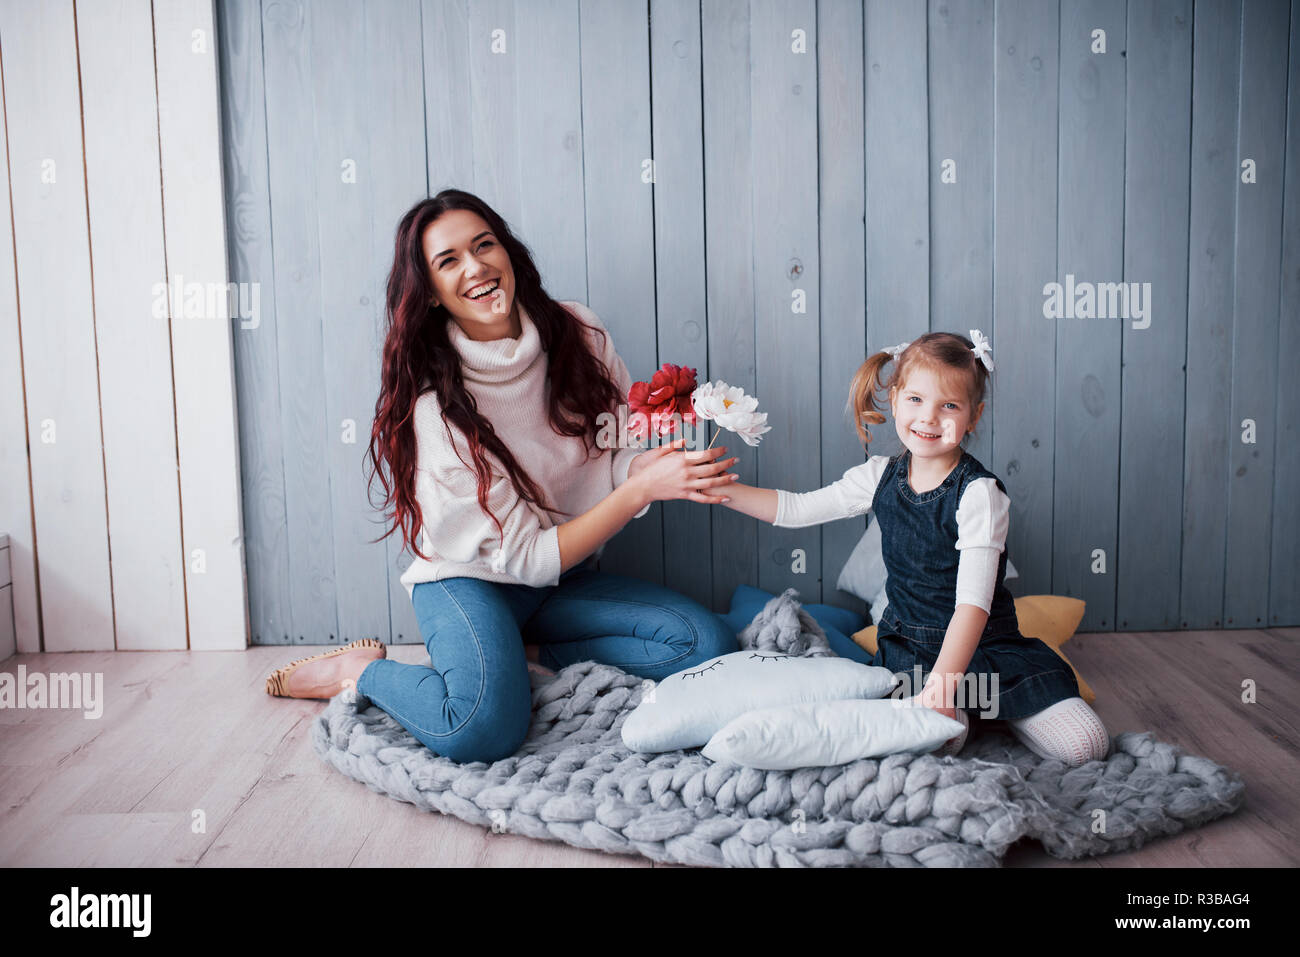 Happy loving family. Mother and her daughter child girl playing together Stock Photo